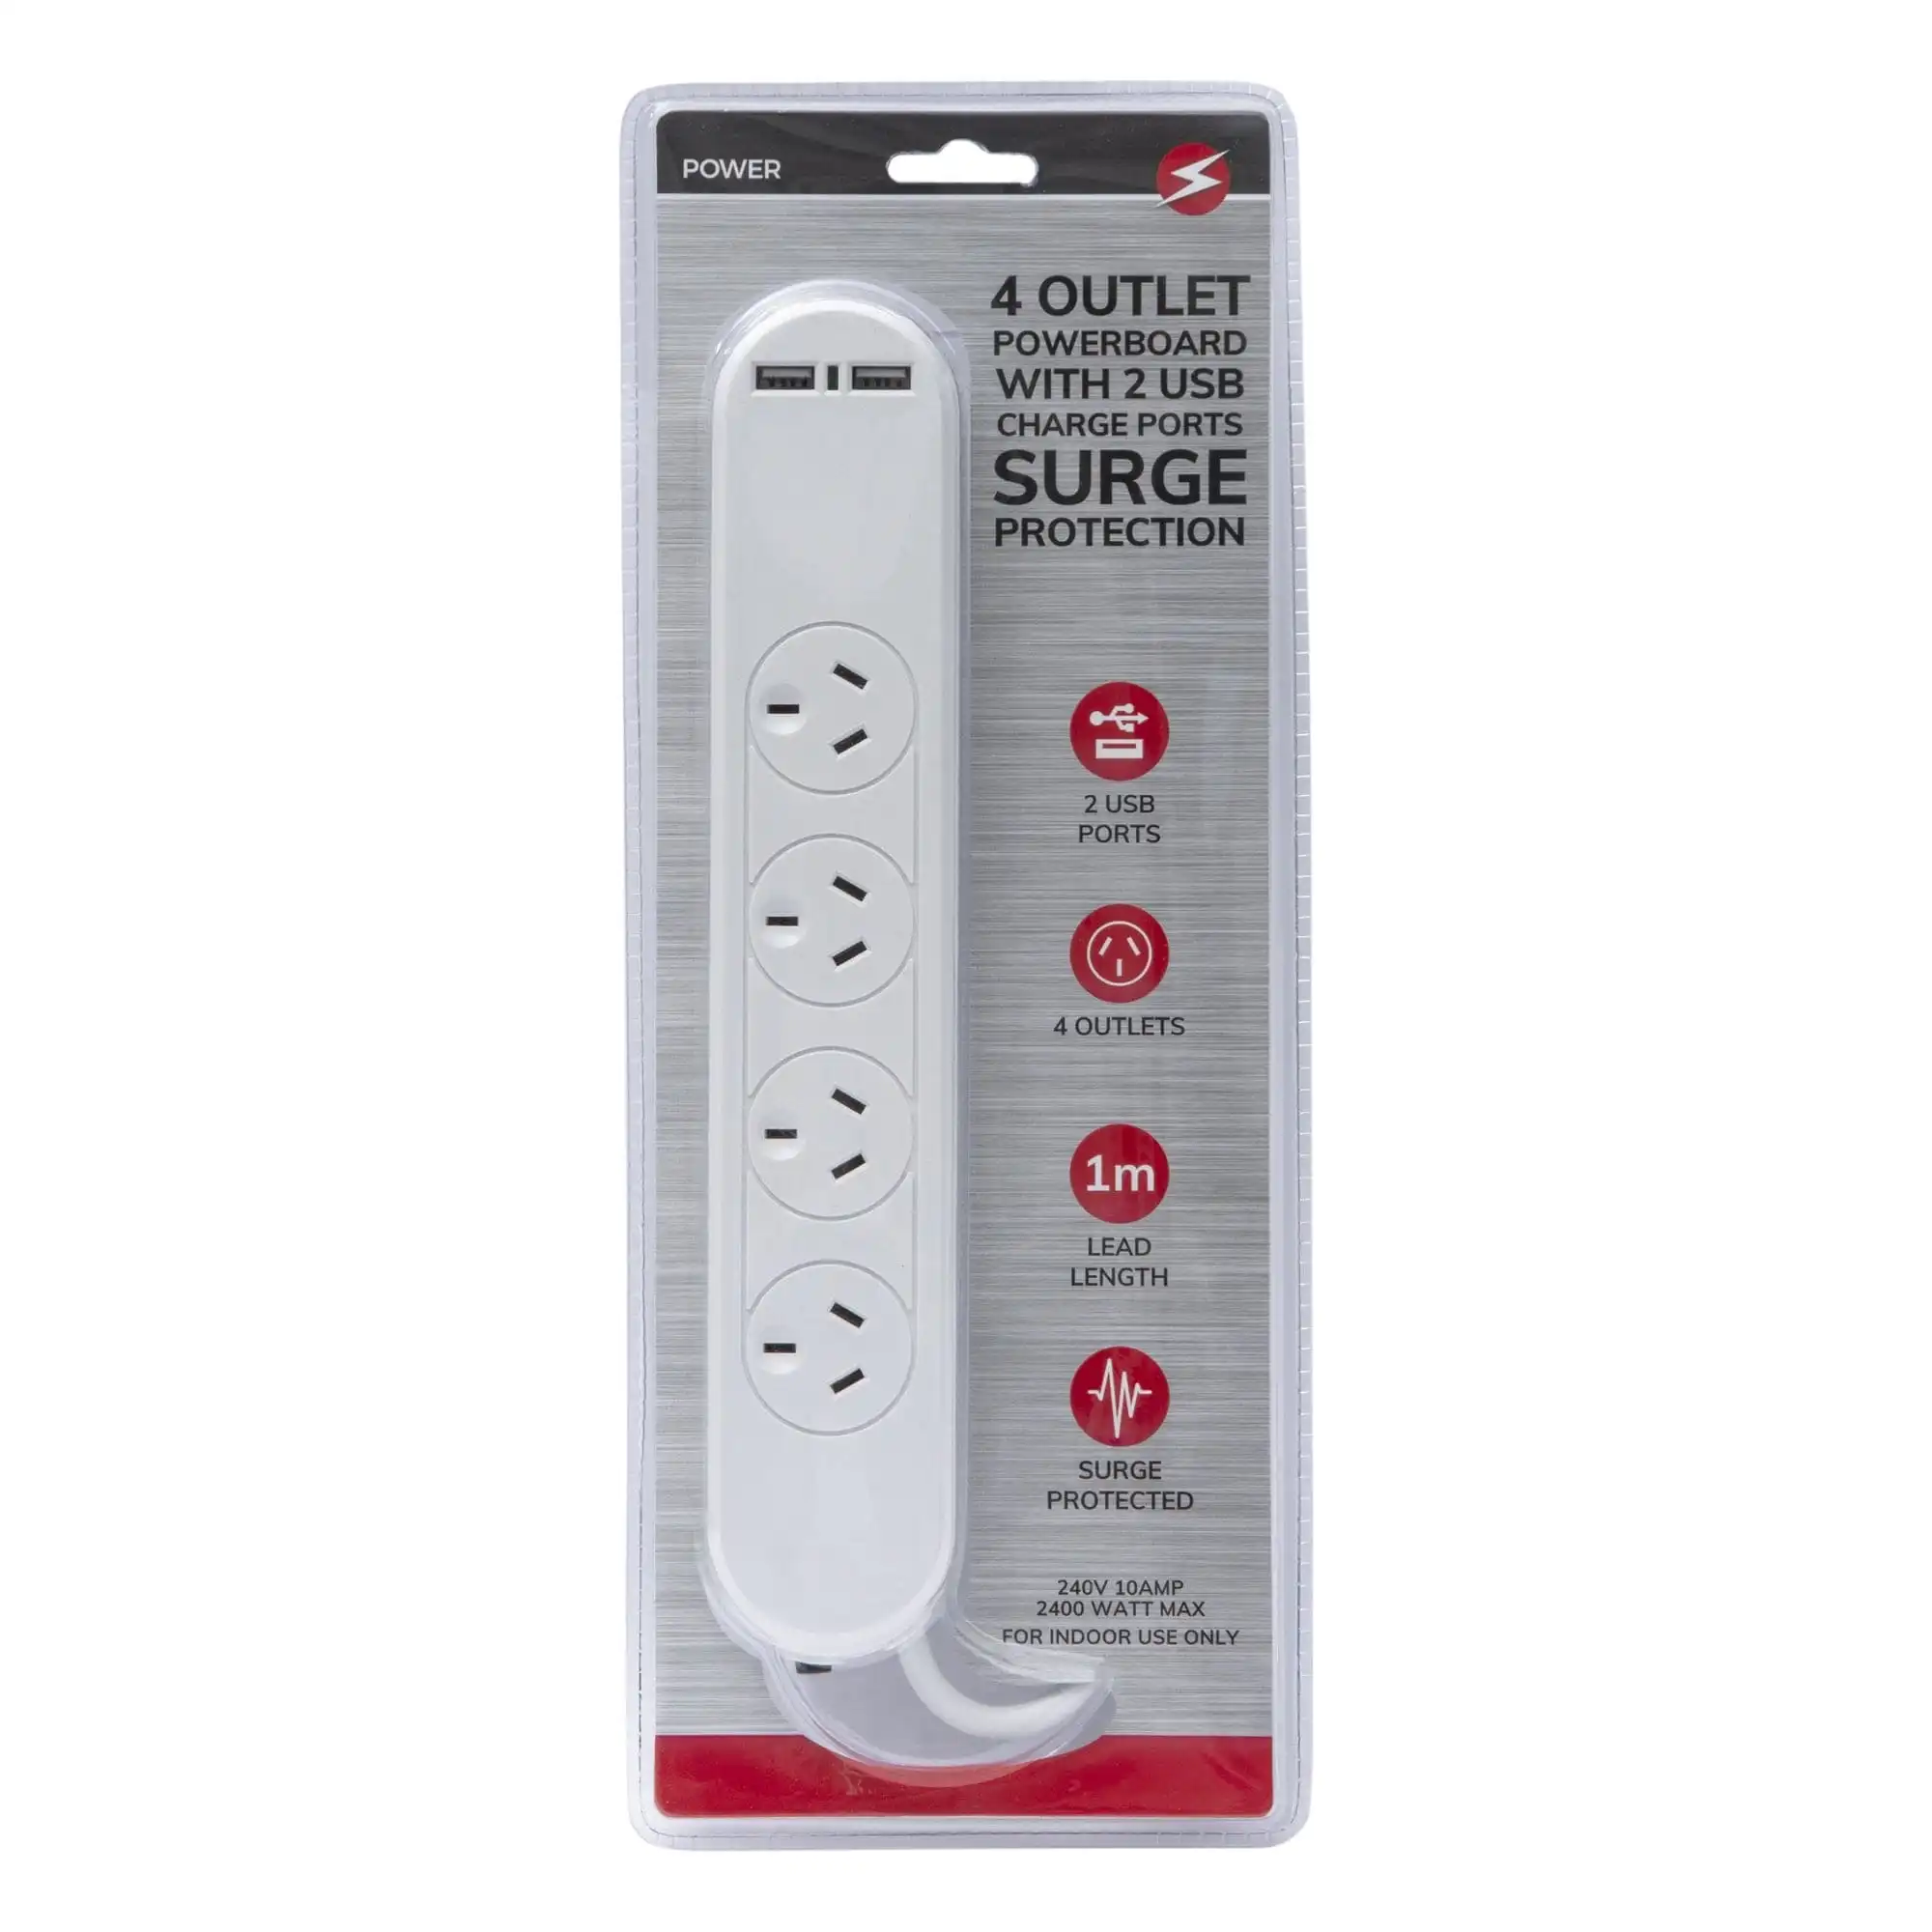 4 Outlet Powerboard With Surge Protection and Dual USB Charger